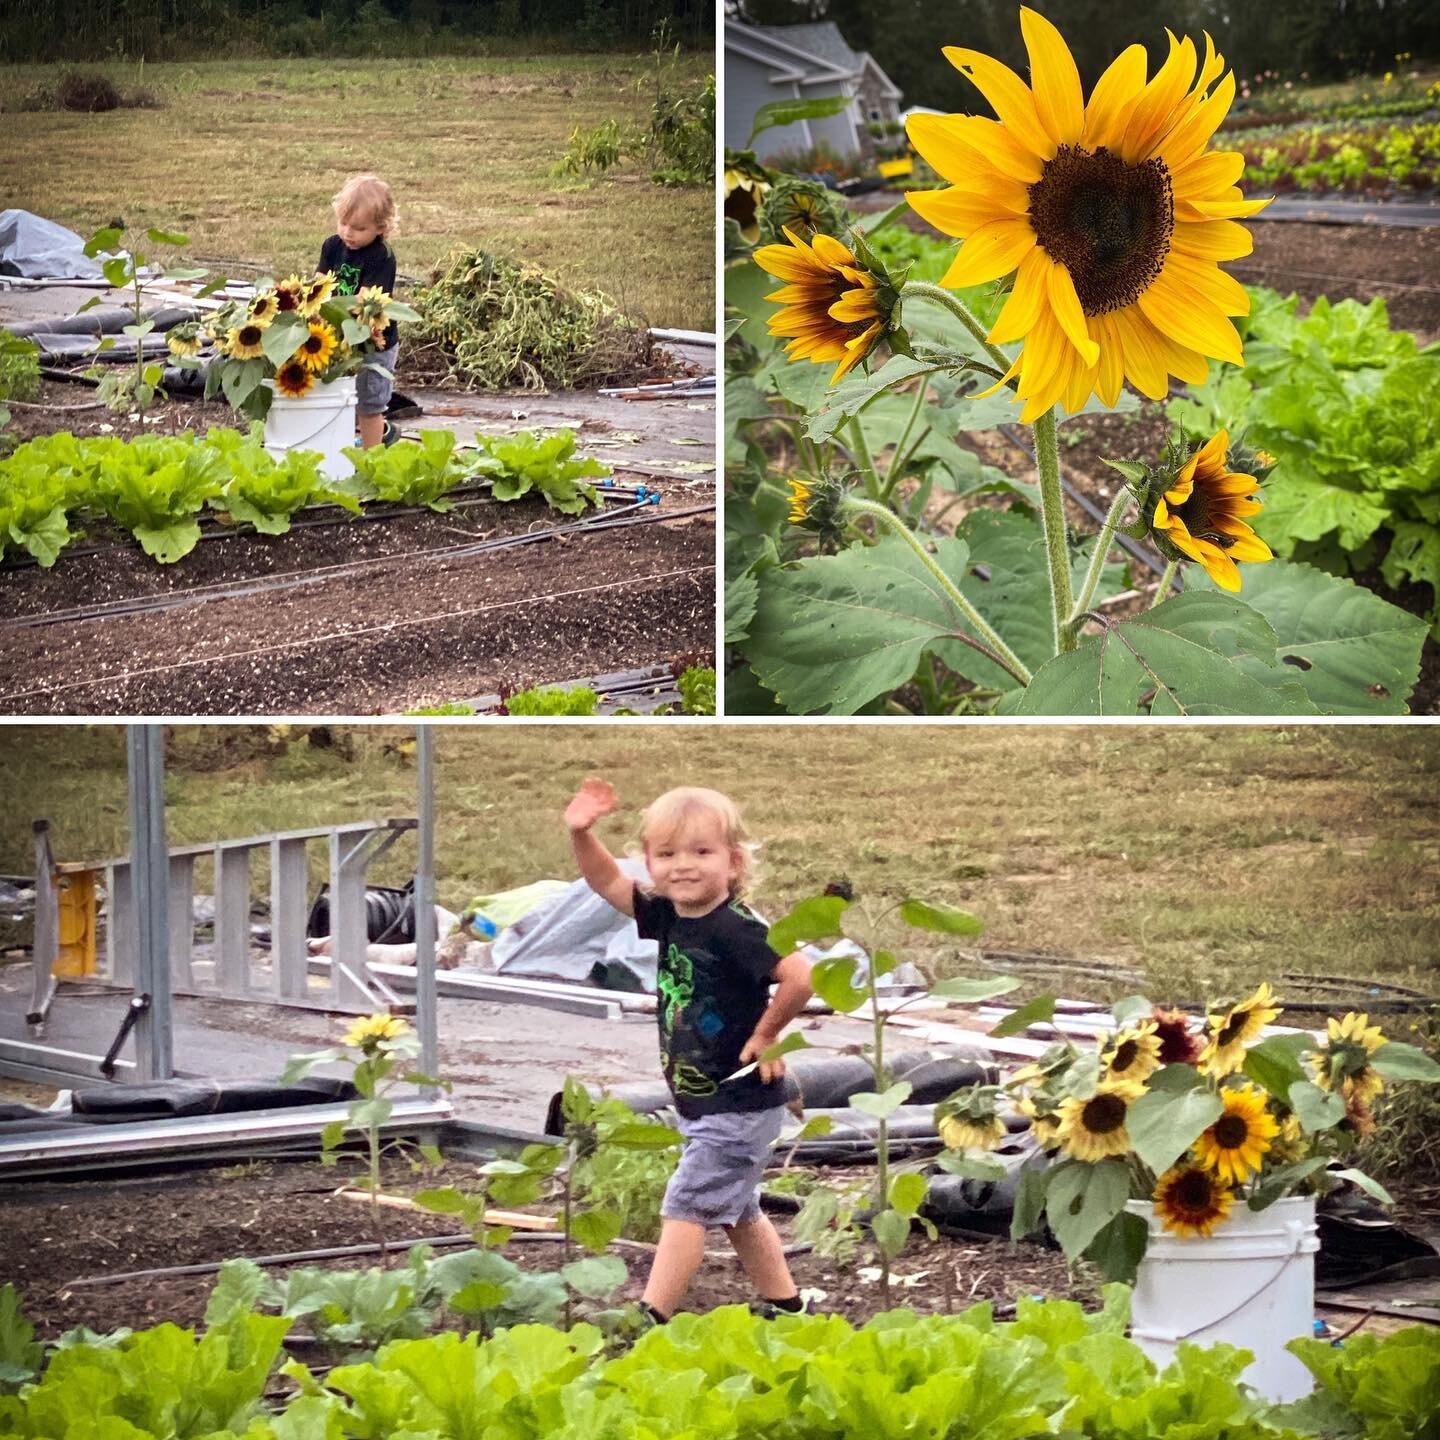 Our Tiny Farmer 👨&zwj;🌾 pouring his love into getting Sunflowers for our market a few weeks ago. 
.
There are times where it&rsquo;s fun and there are times that are tough when raising a little one and starting a new farm. At the end of the day...I